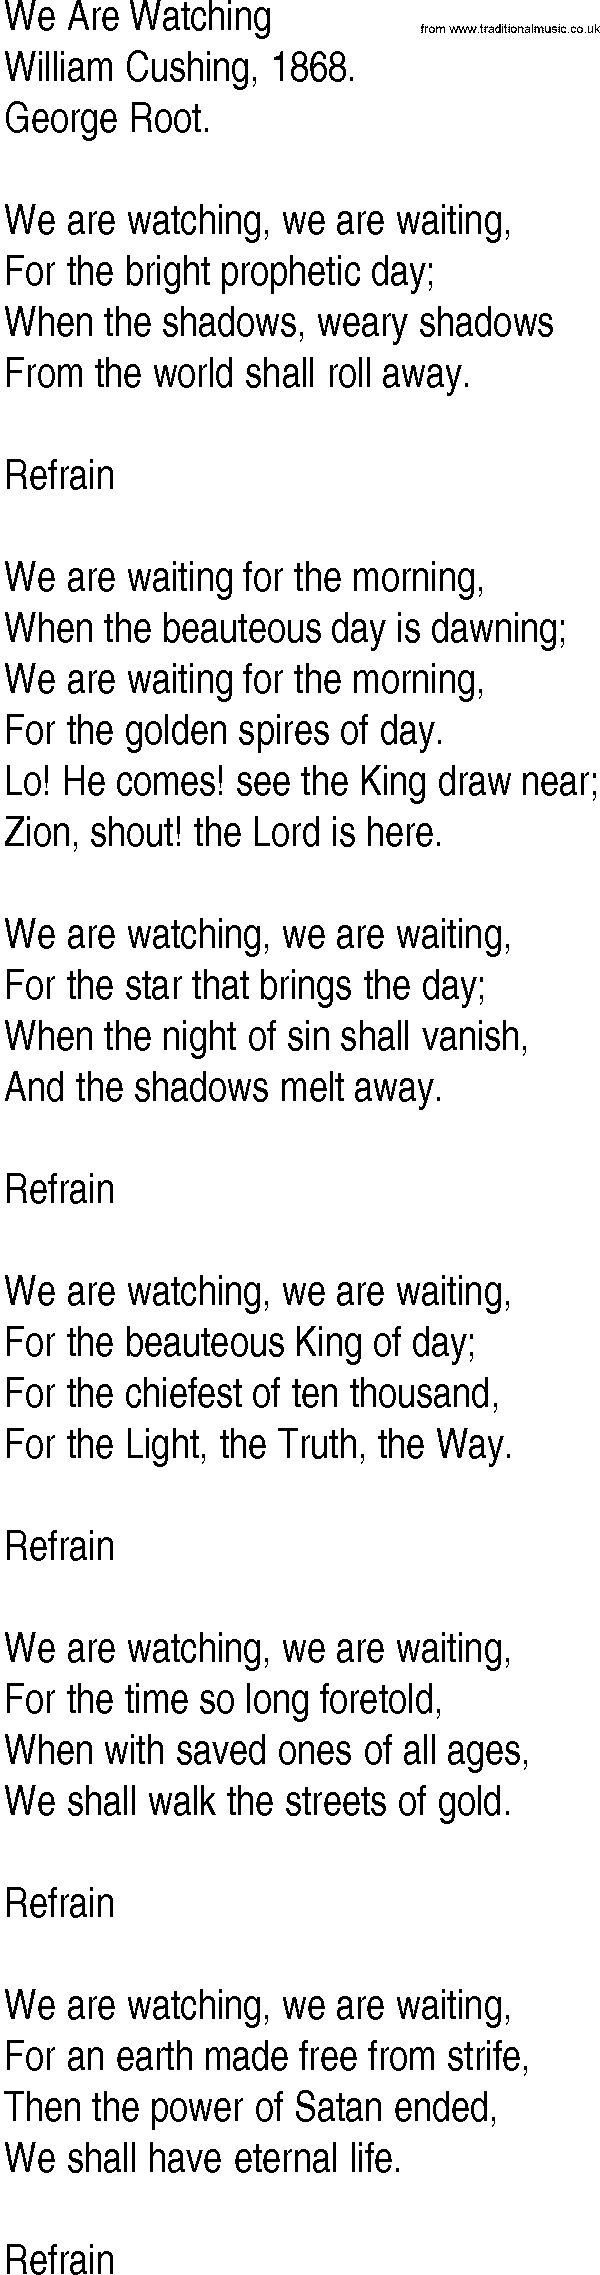 Hymn and Gospel Song: We Are Watching by William Cushing lyrics